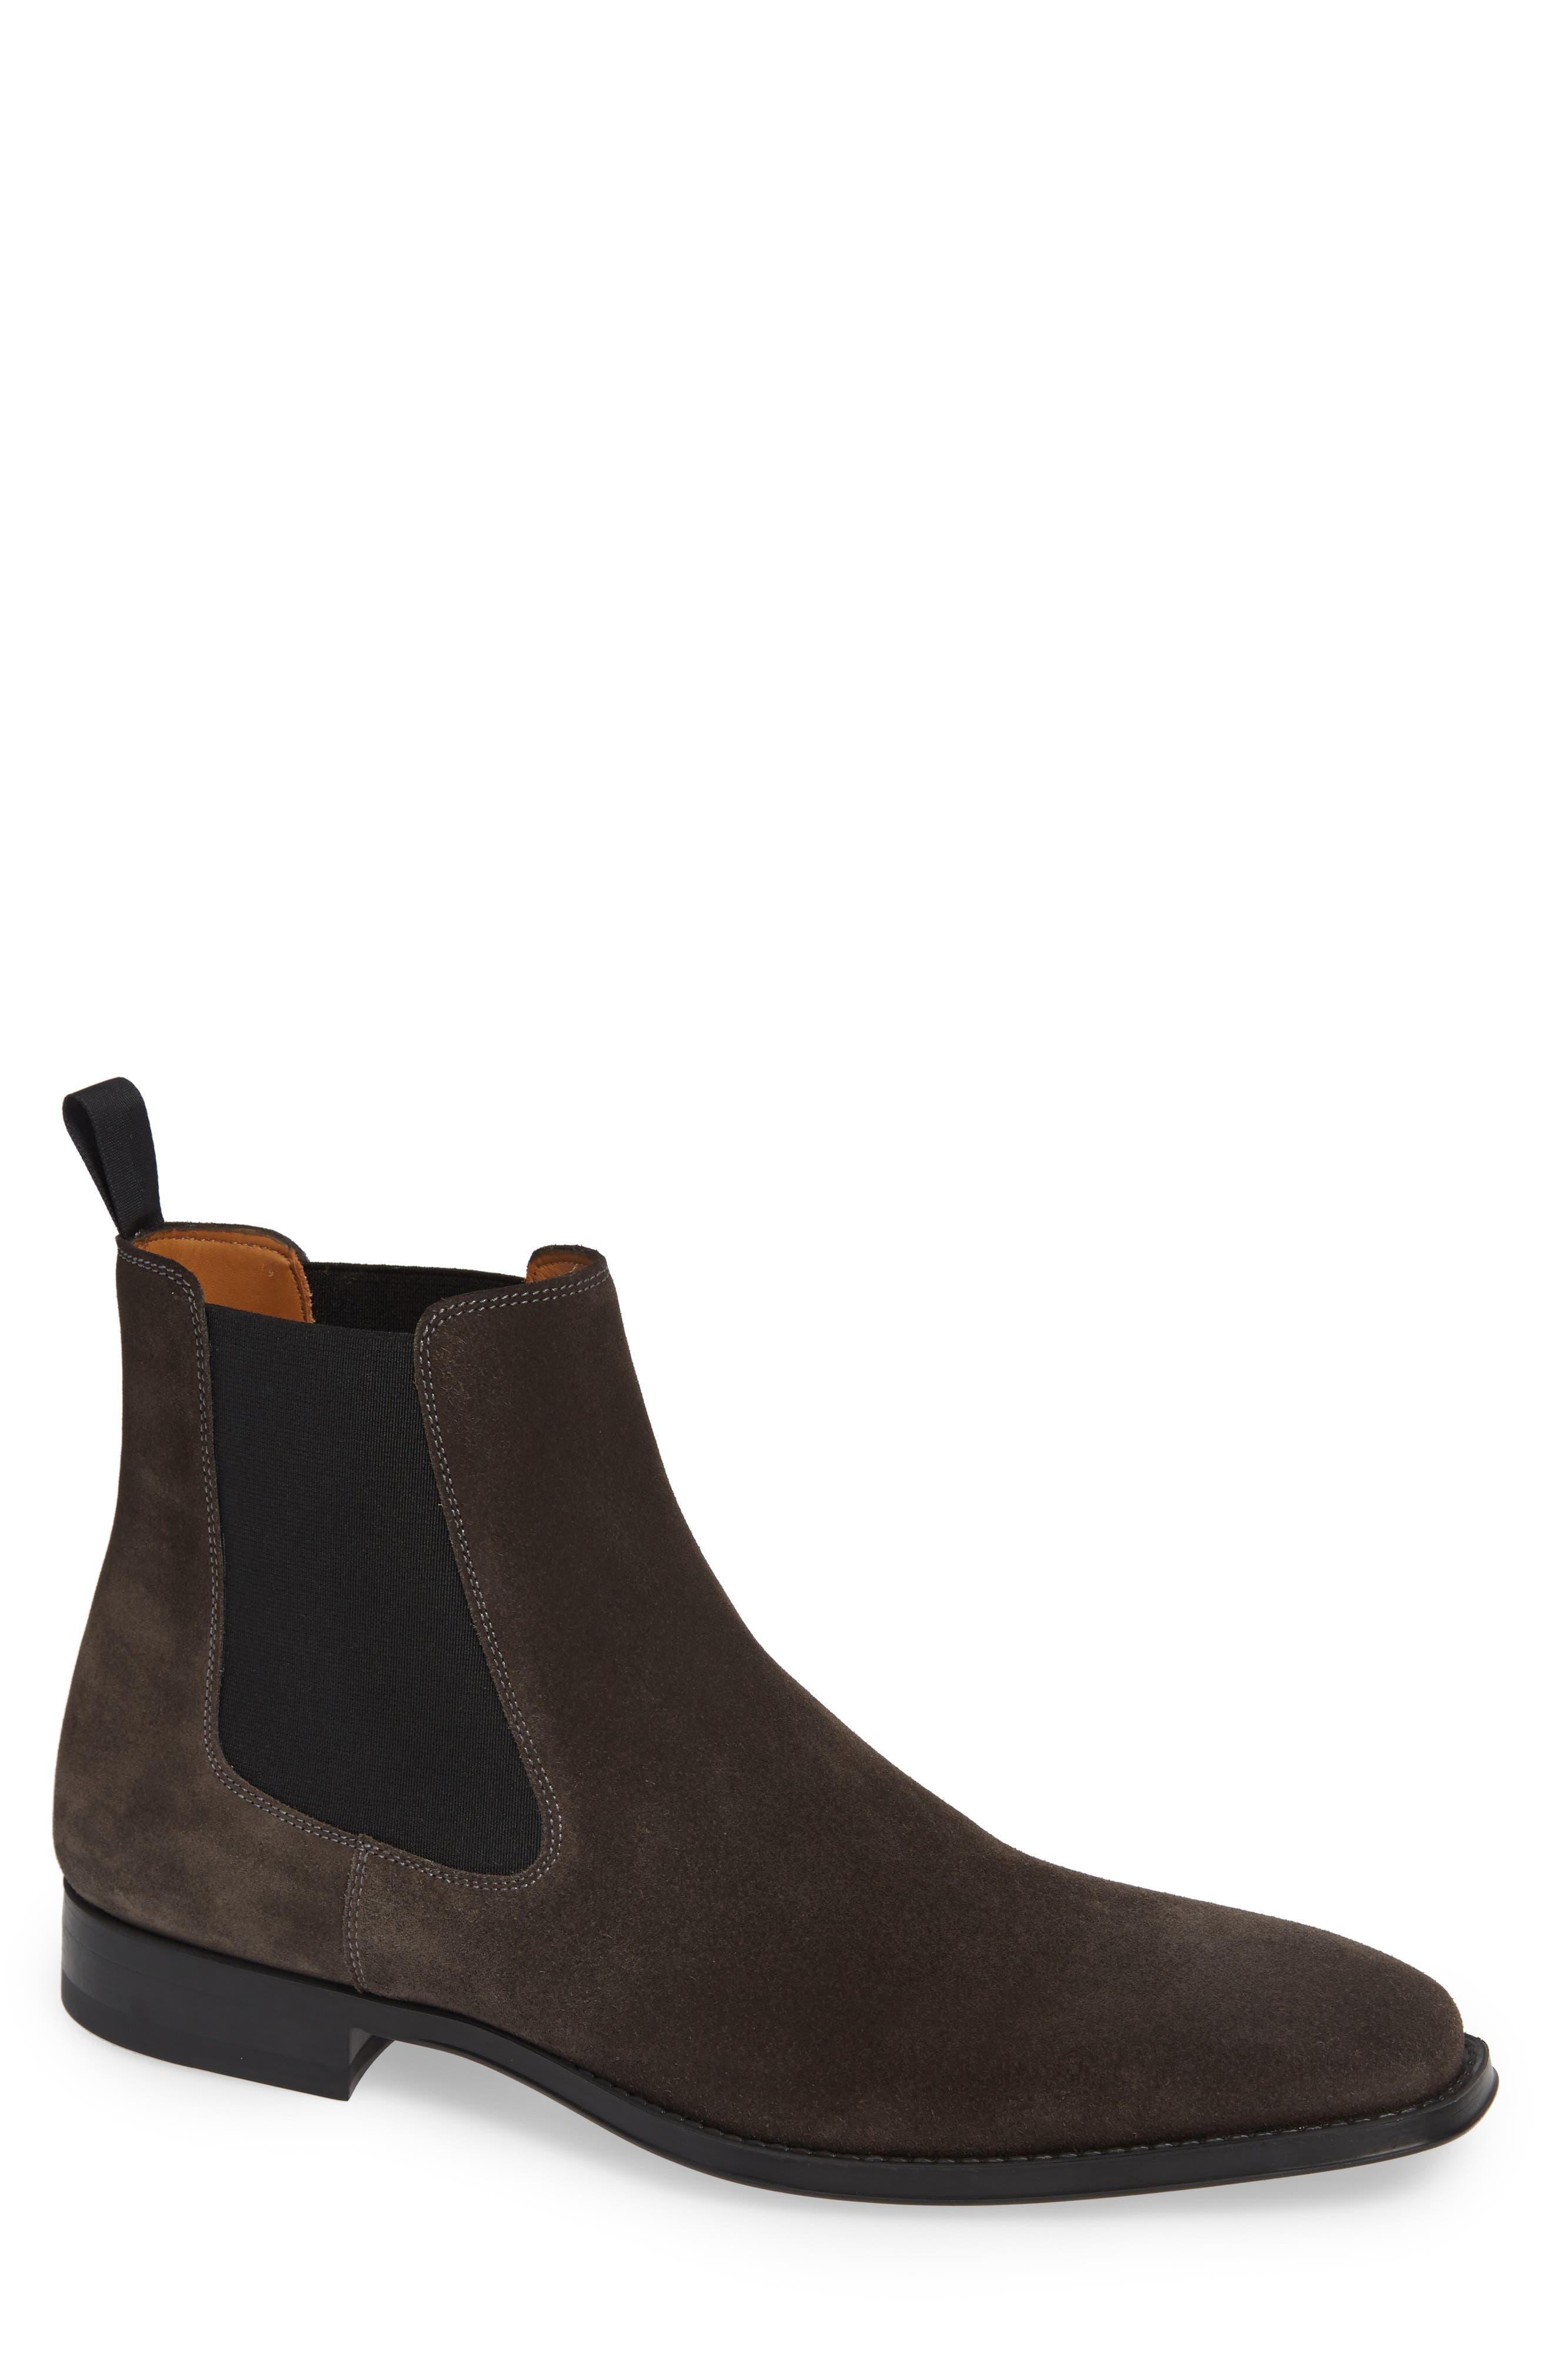 magnanni suede boots